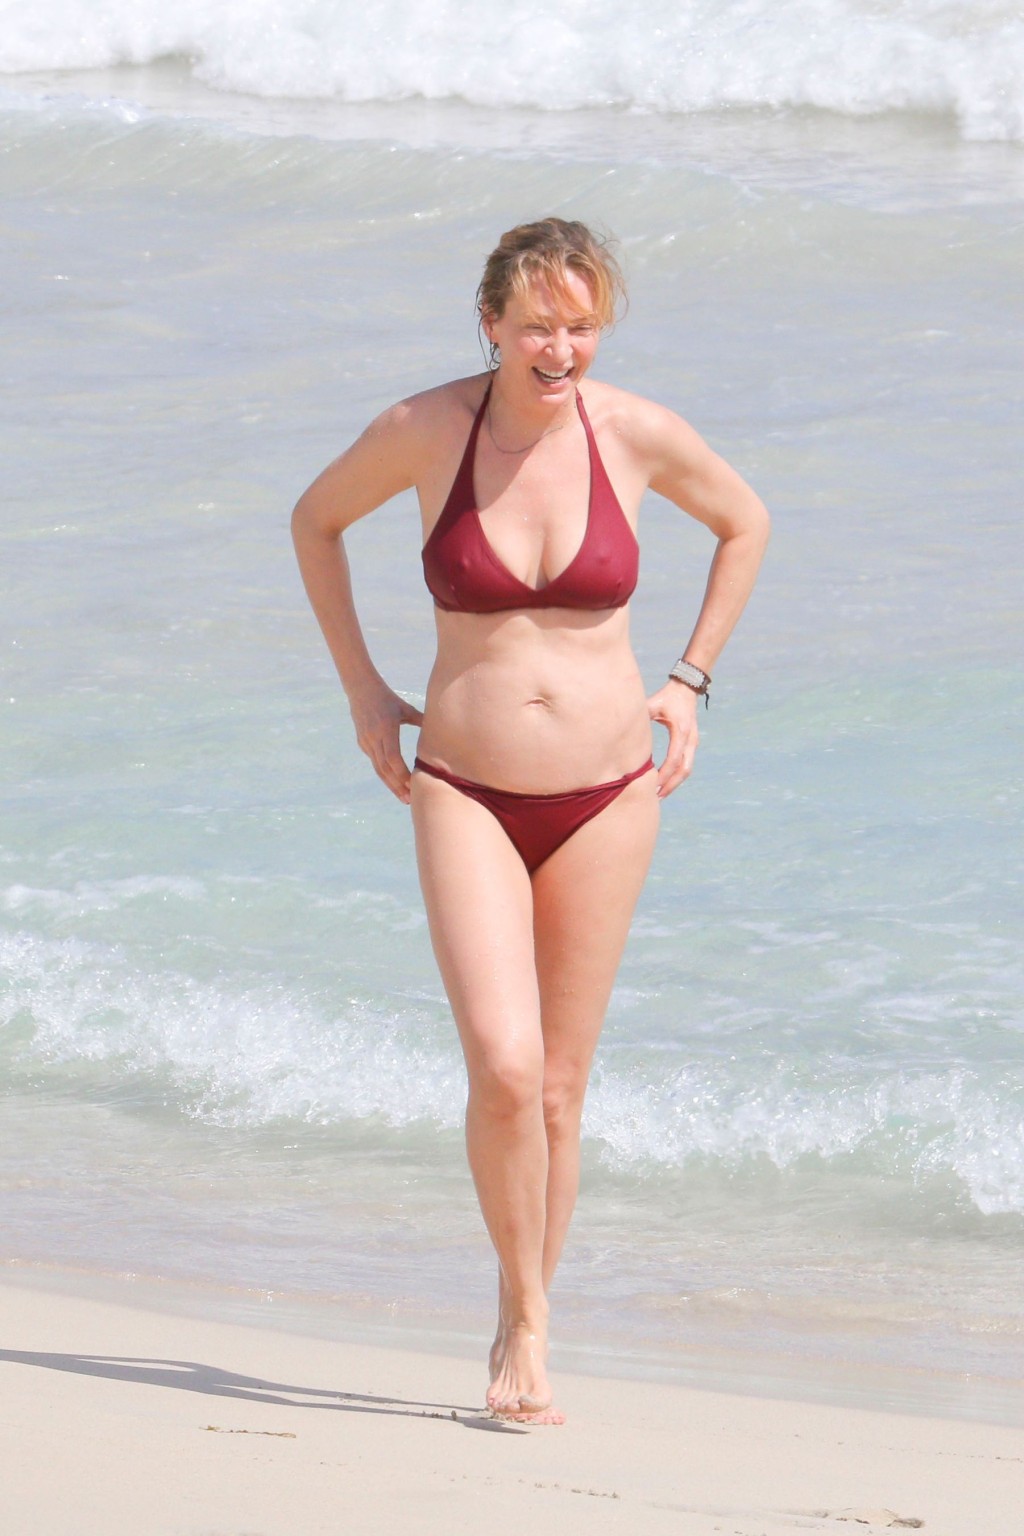 Uma Thurman busty showing pokies in a skimpy red bikini at the beach in StBarts #75170088